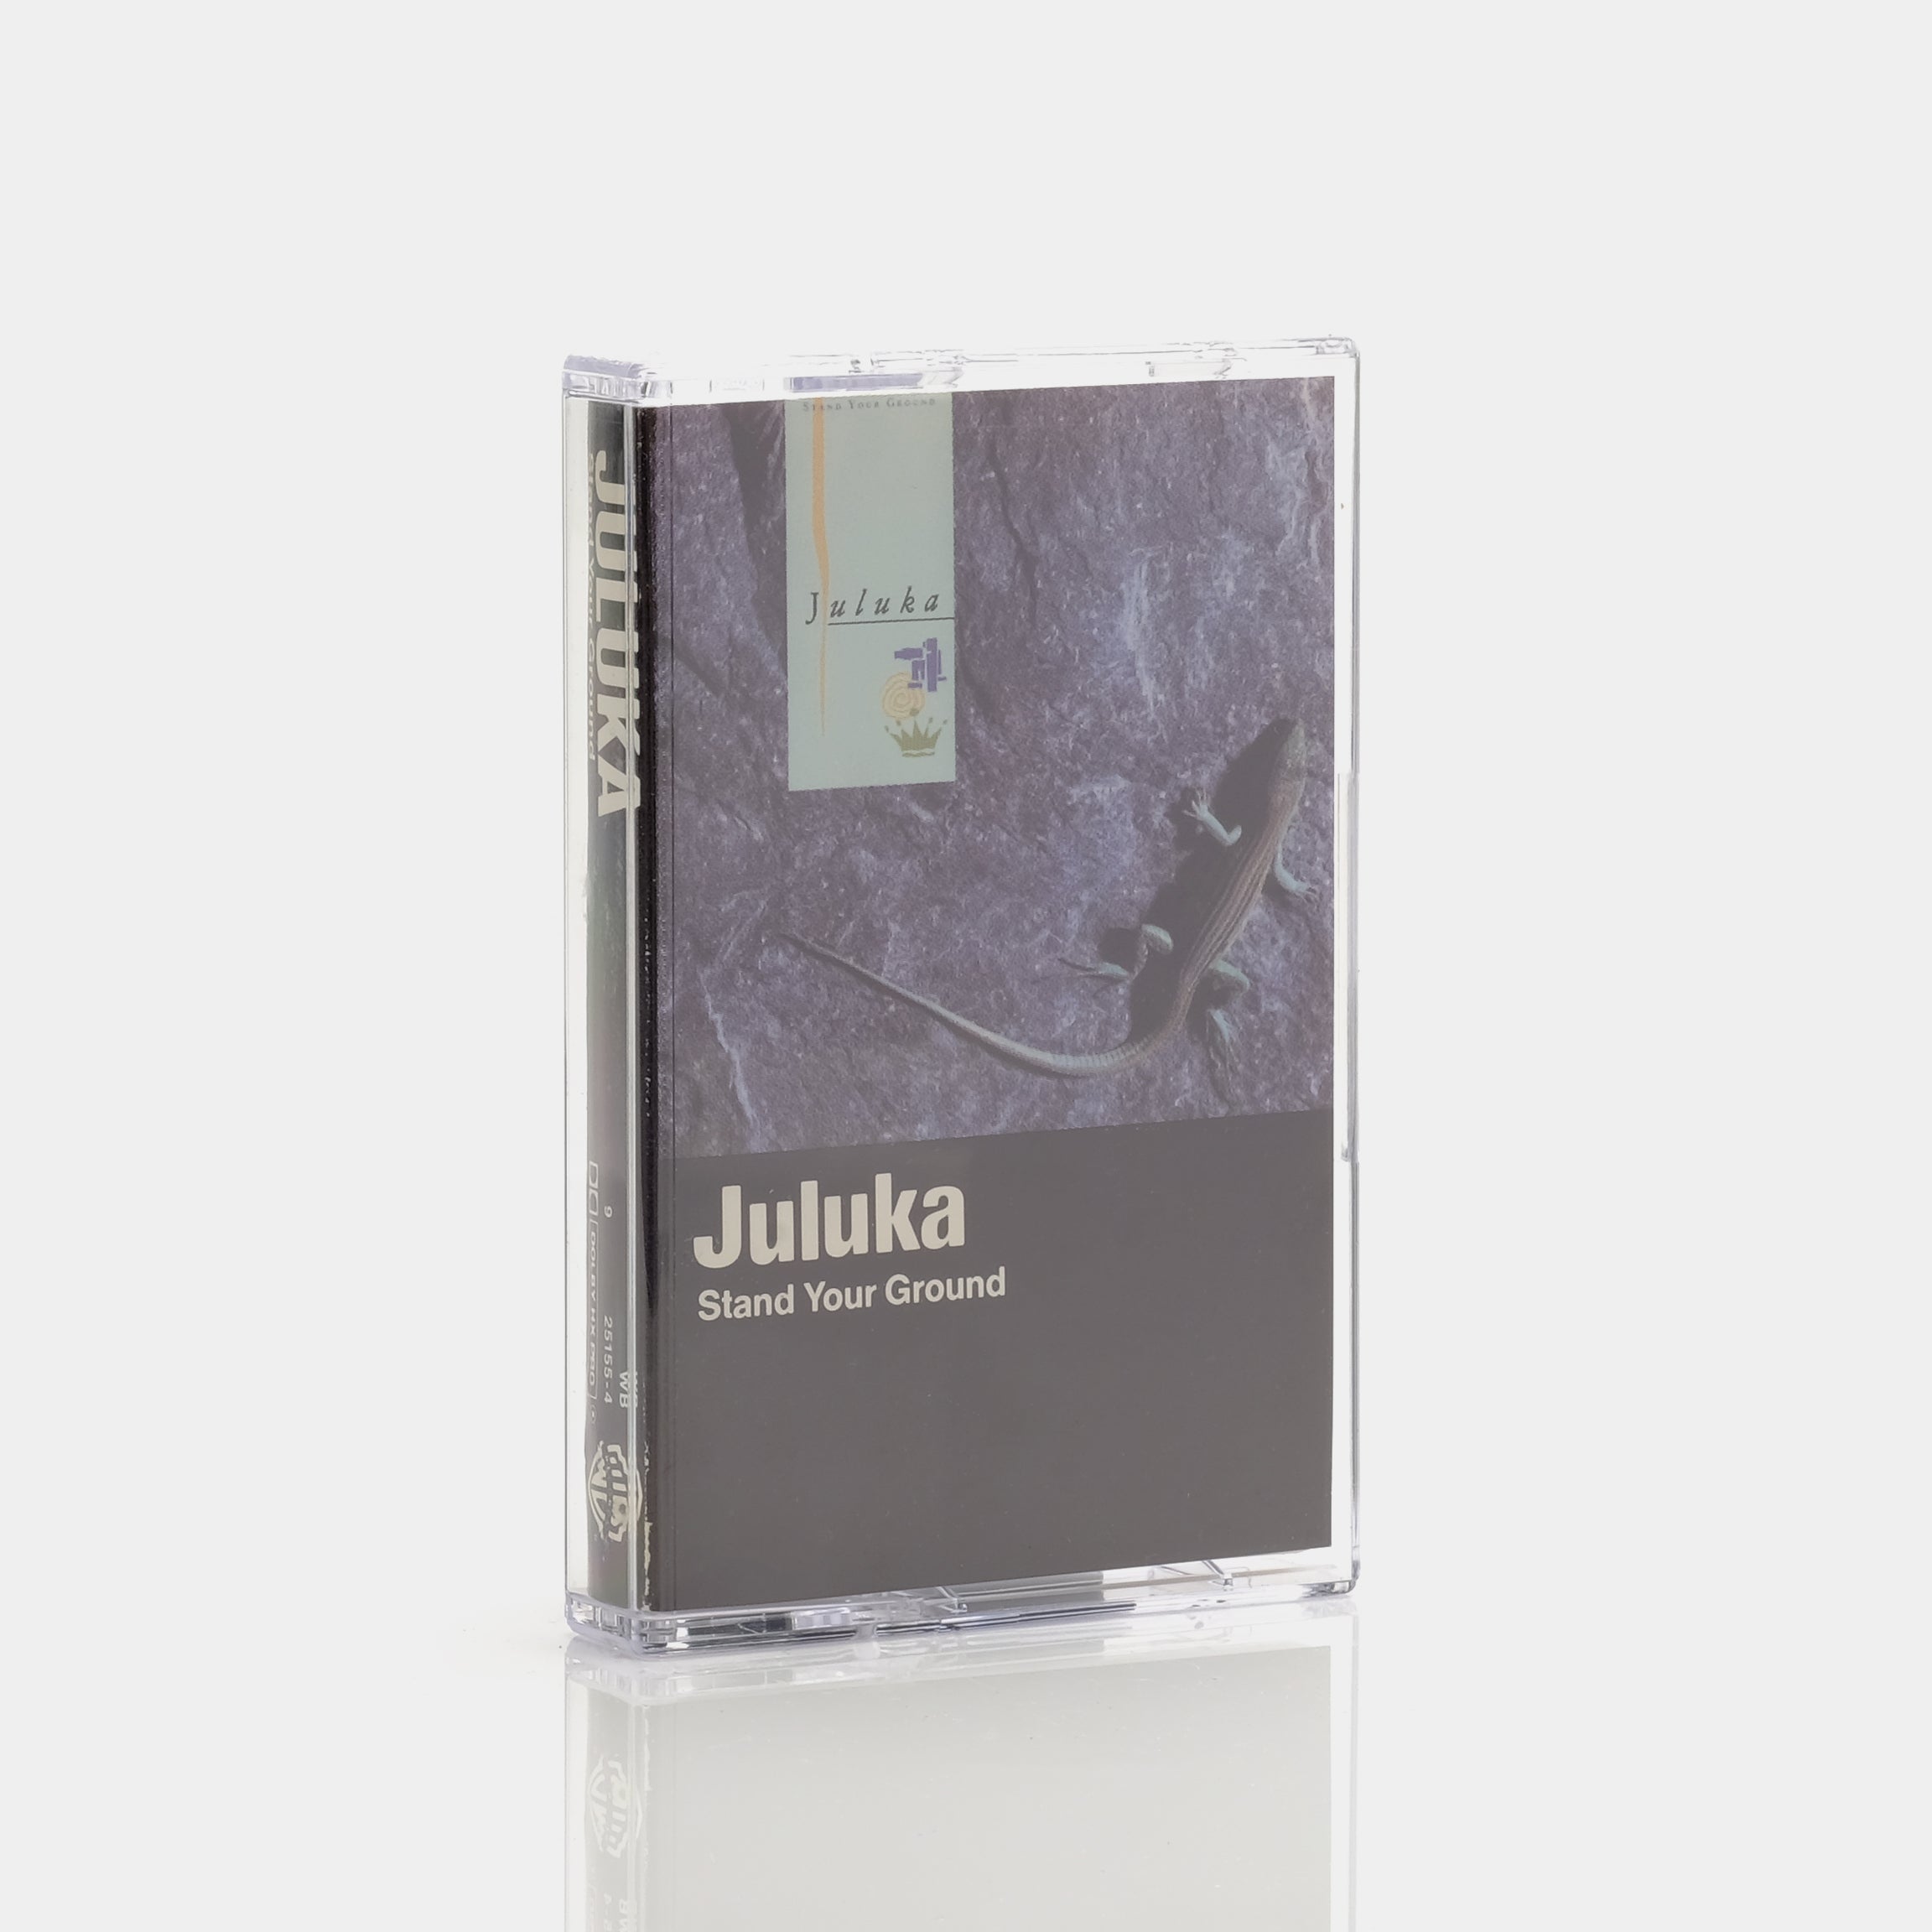 Juluka - Stand Your Ground Cassette Tape